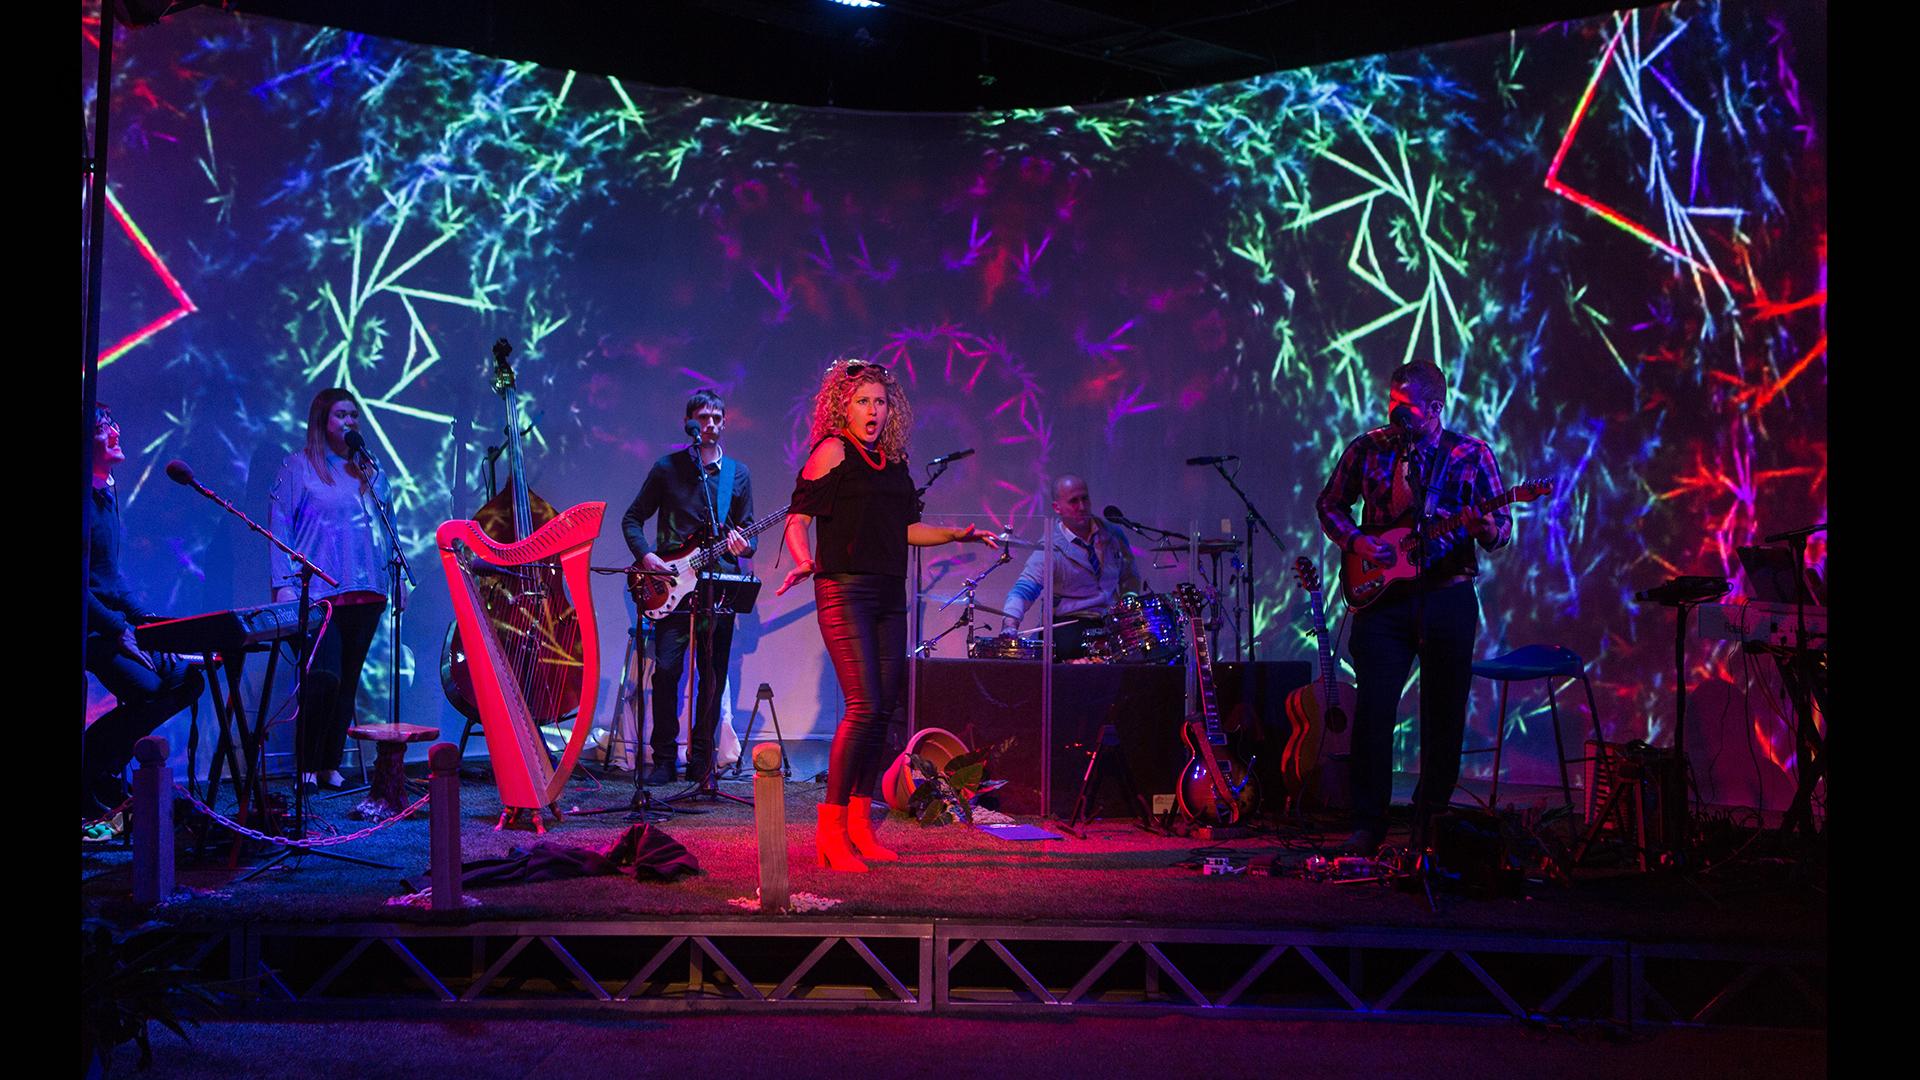 A female singer inf ront of a band with colourful patterns projected behind